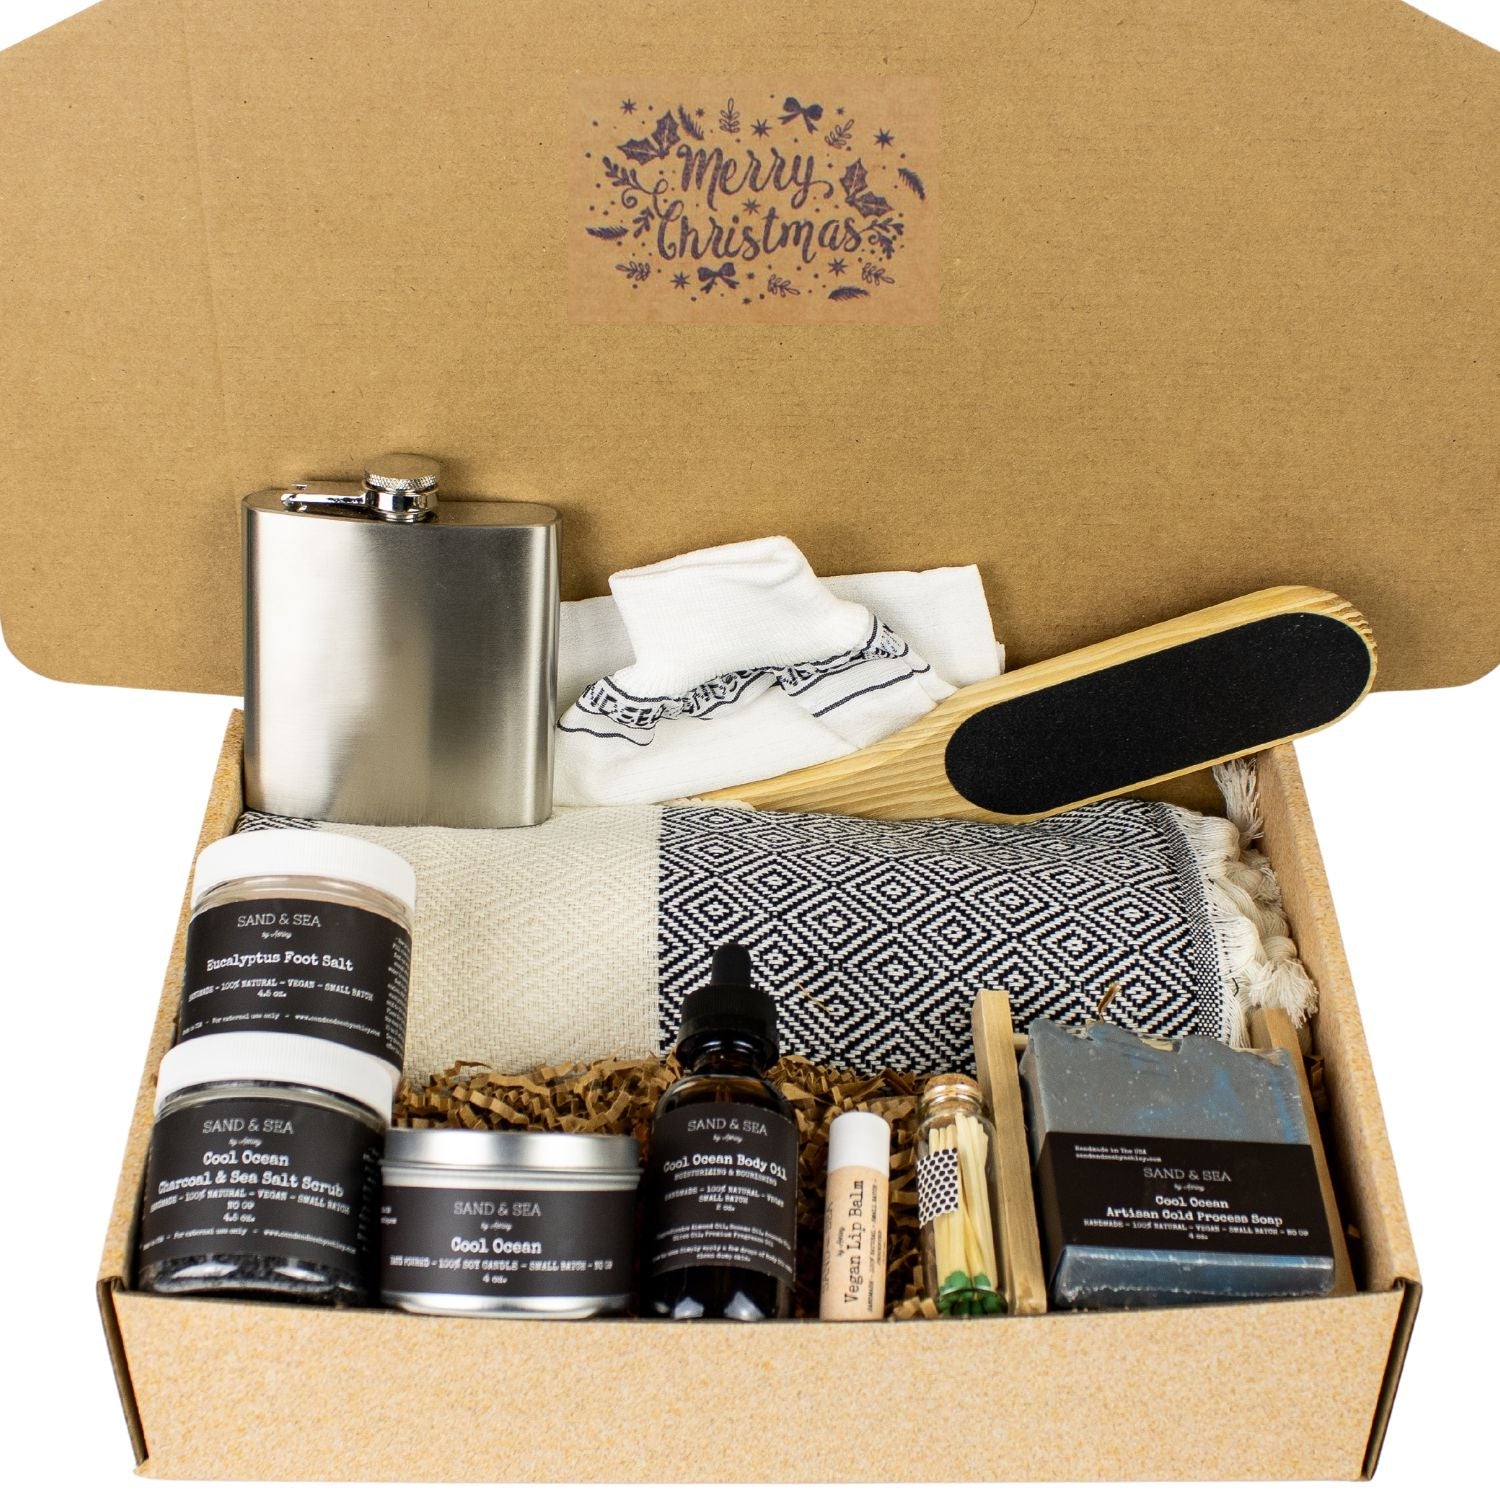 Happy Birthday Gifts for Men - Spa Gift Set for Dad, Husband, Boyfriend - Relaxation Self Care Gift Basket for Him